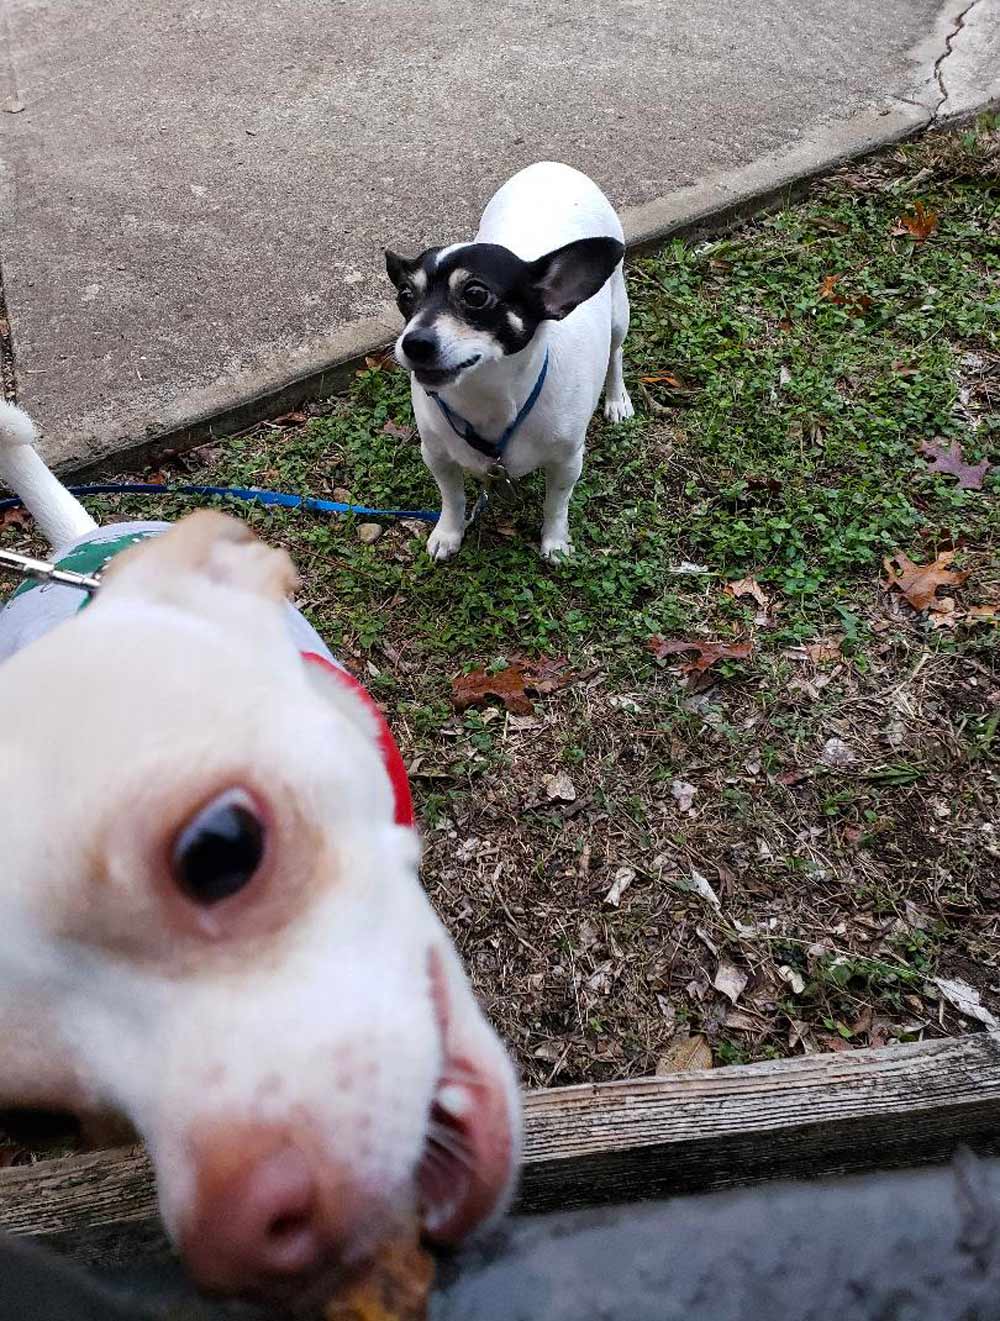 Meet LuLu (foreground) and Duncan. Both Rat Terriers, are taking turns receiving treats from the neighbor in the next complex. Very patient playmates!